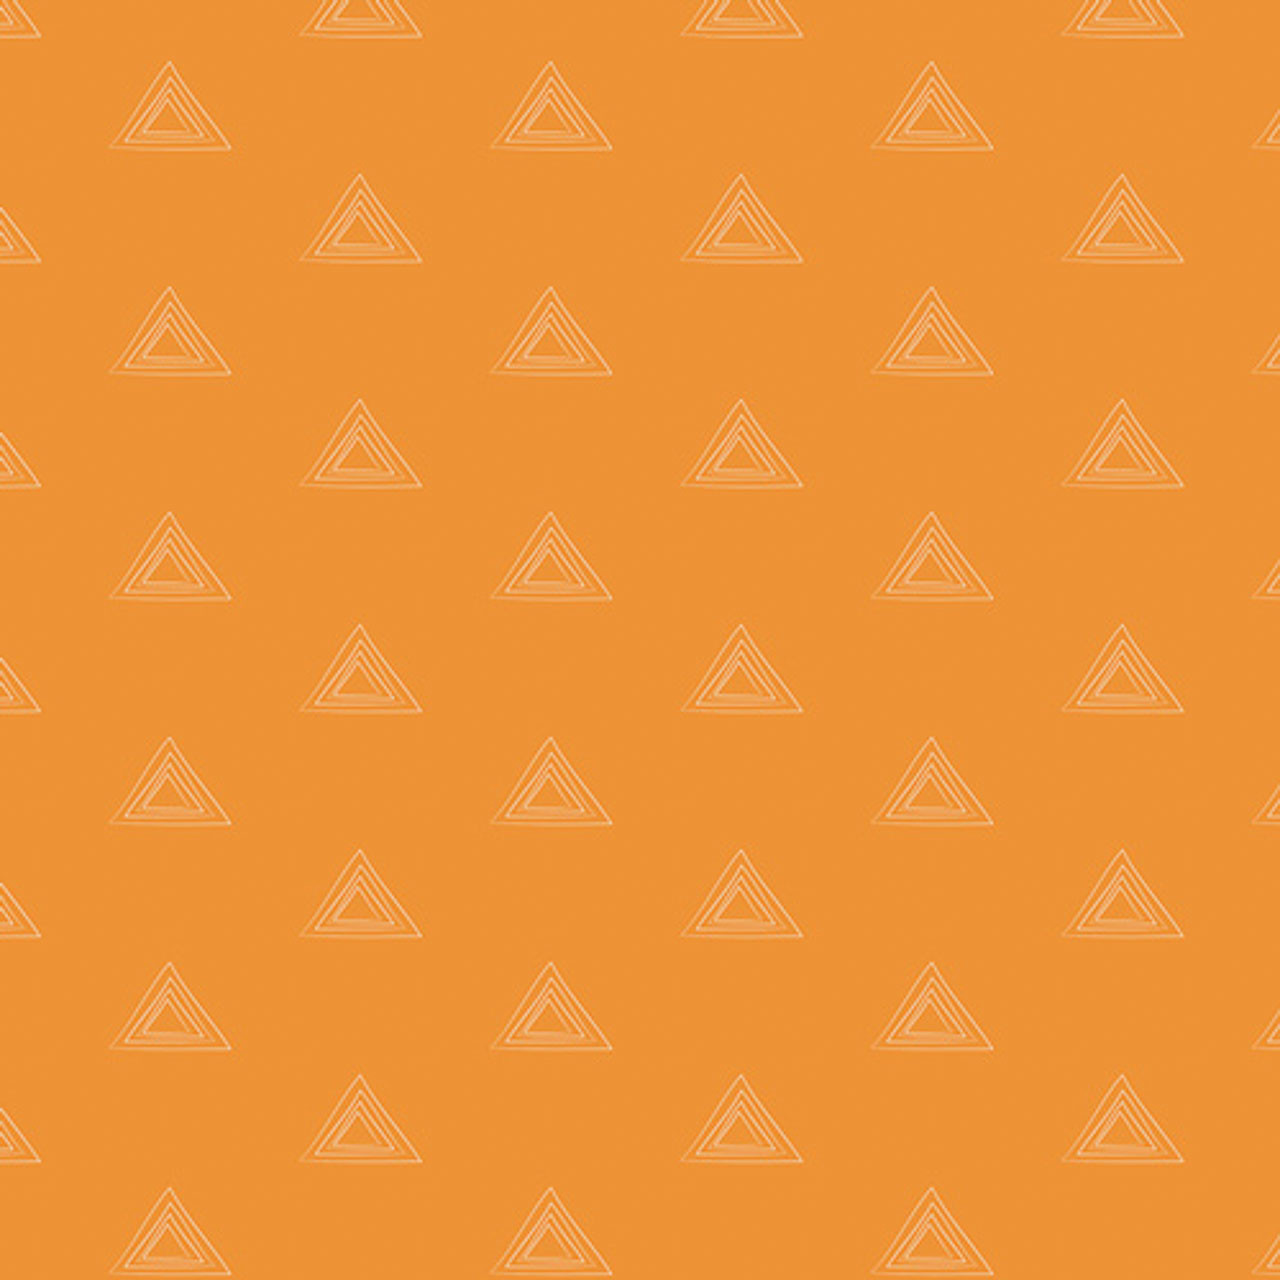 Orange 100% cotton fabric with a geometric triangle pattern from Art Gallery's Prism Elements collection, named Apricot Sunstone.